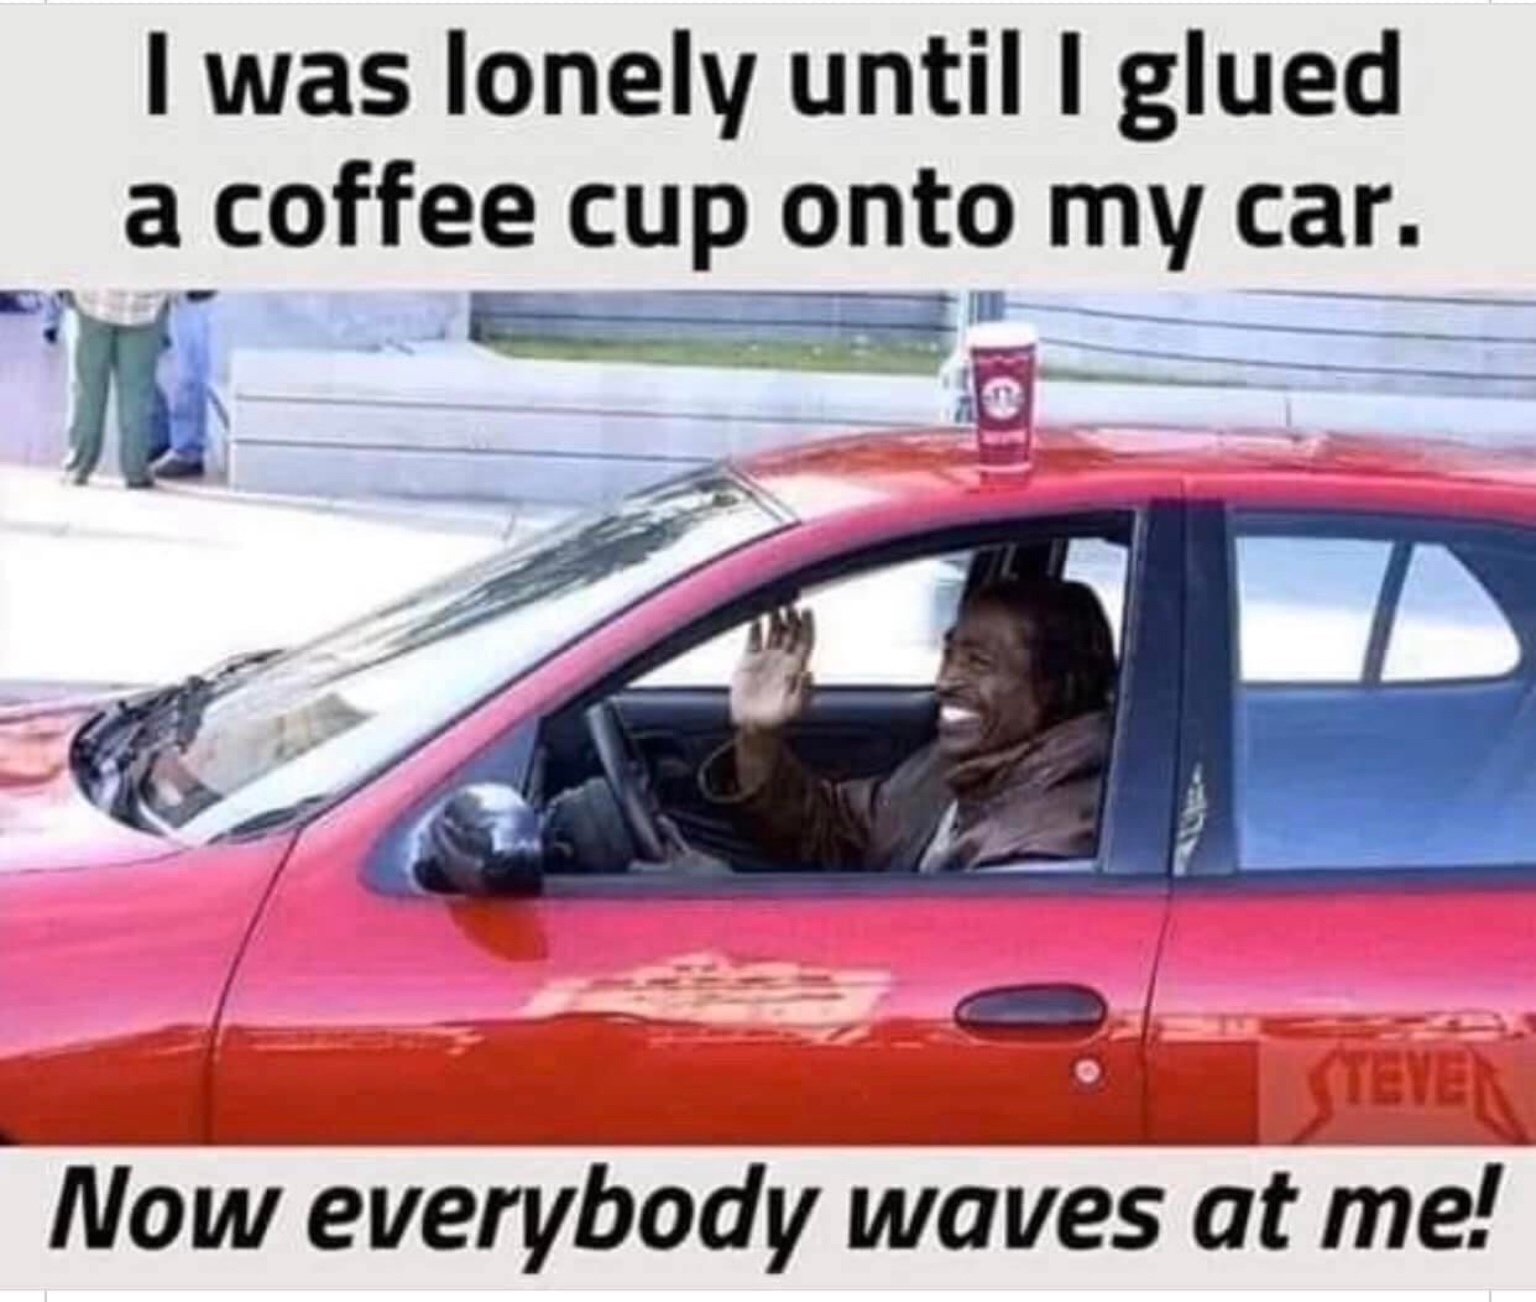 lonely until i glue a coffee cup onto my car - I was lonely until I glued a coffee cup onto my car. Now everybody waves at me!